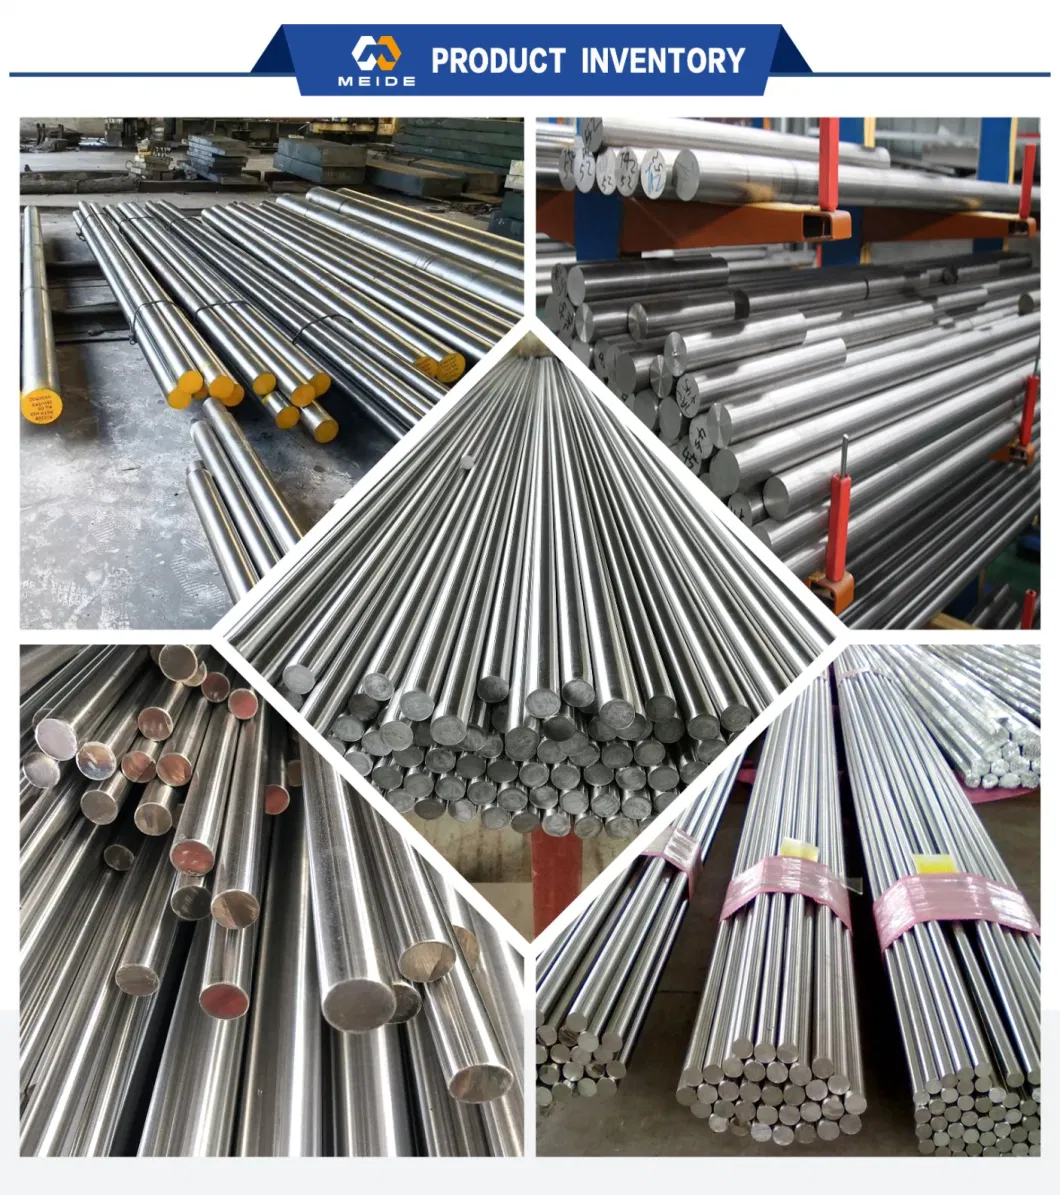 Hot Rolled High Quality Carbon Steel Bar SKD1/D3/1.2080/Cr12/X210cr12/1.2080/Std1 Structure Mild Carbon Forged Bright Steel Round Bar